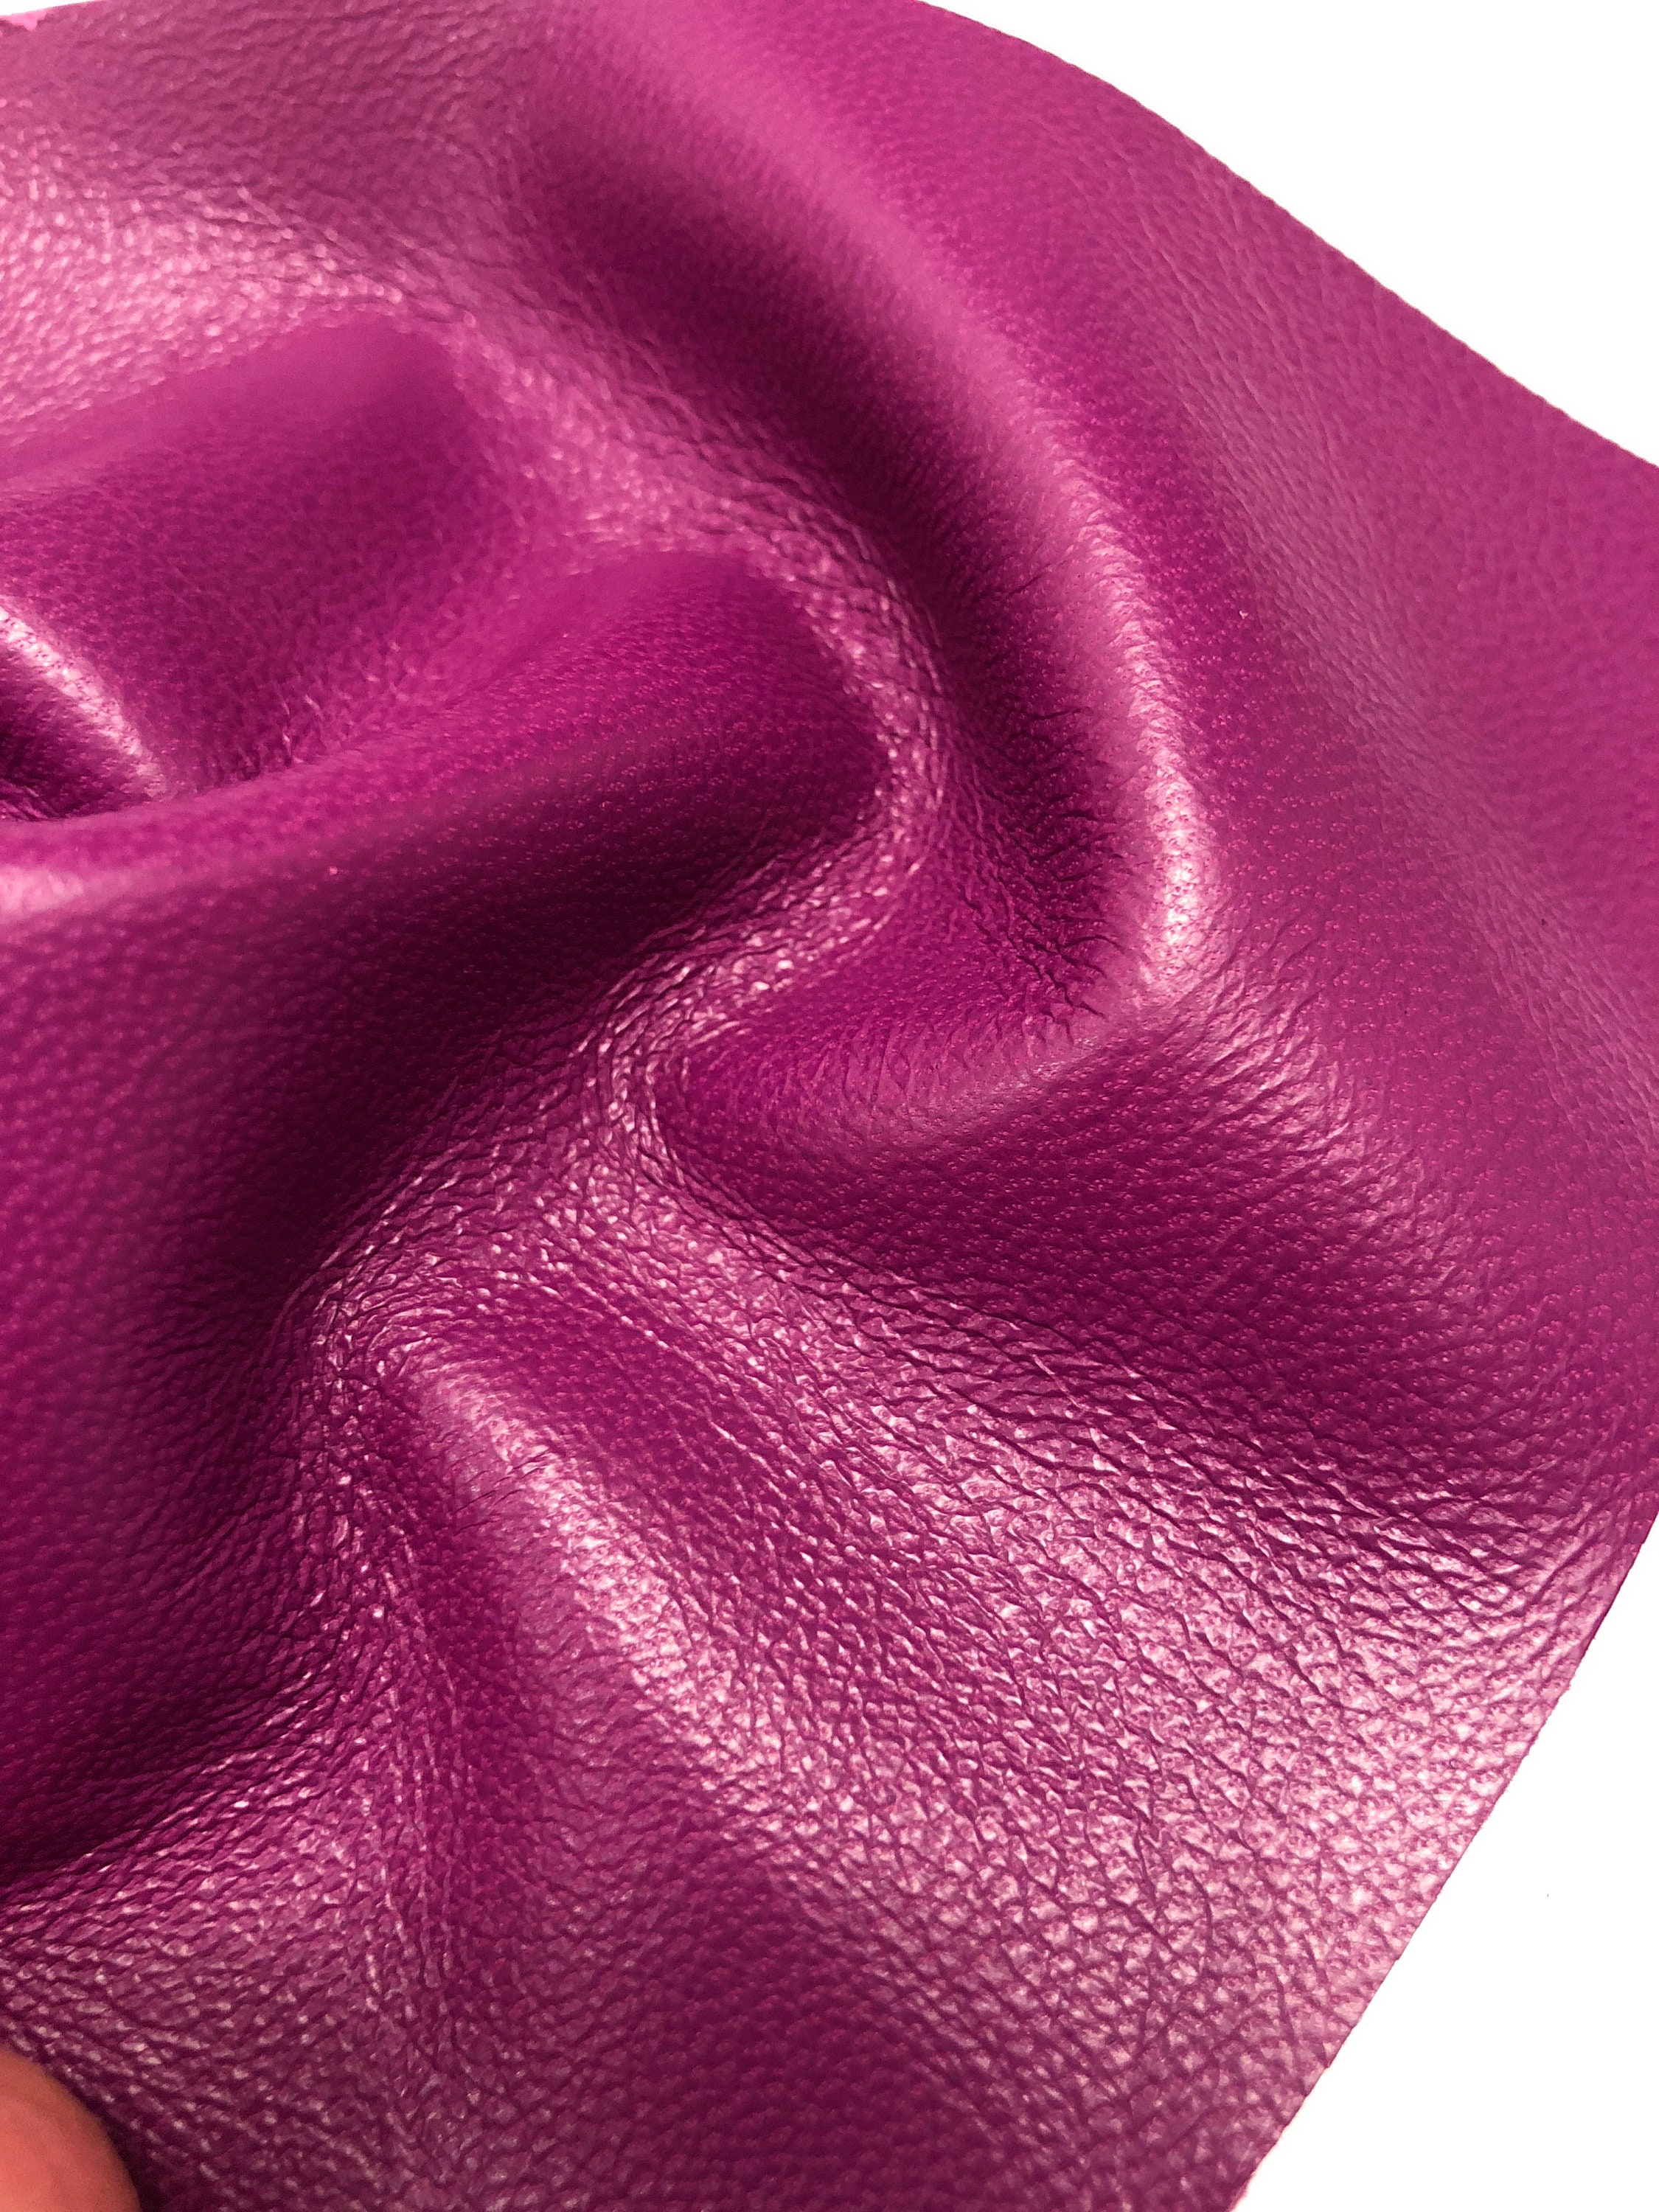 Leather 12x24 PURPLE PASSION SUPERB Leather, High Quality Lambskin Leather,  .06mm Thickness, M7001purplepassion, CC325 -  Norway